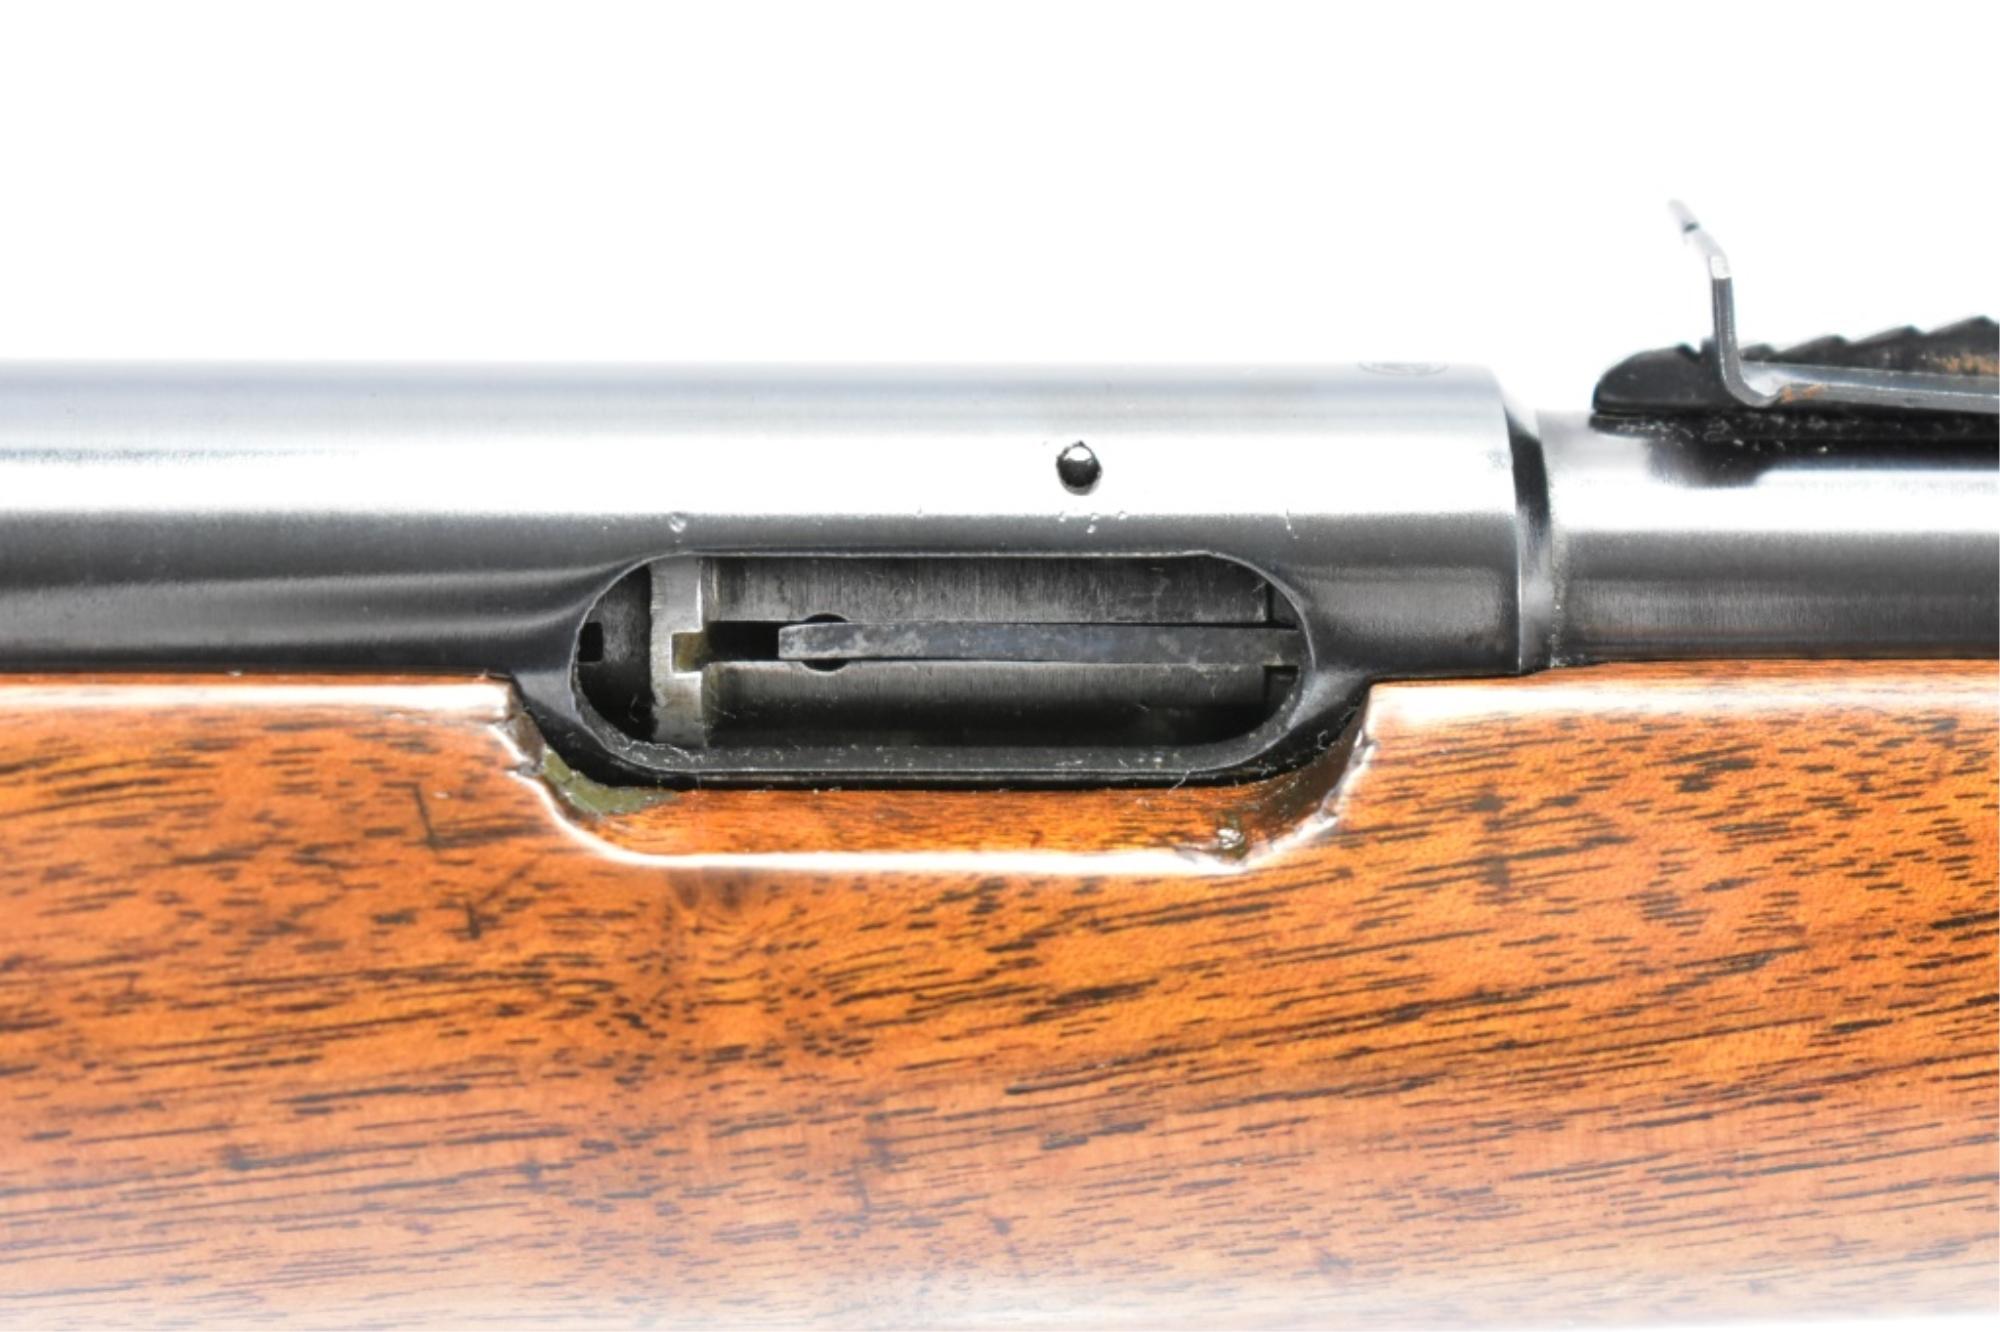 1938 Winchester, Model 74 (First Year Production), 22 SHORT Cal., Semi-Auto, SN - 3907